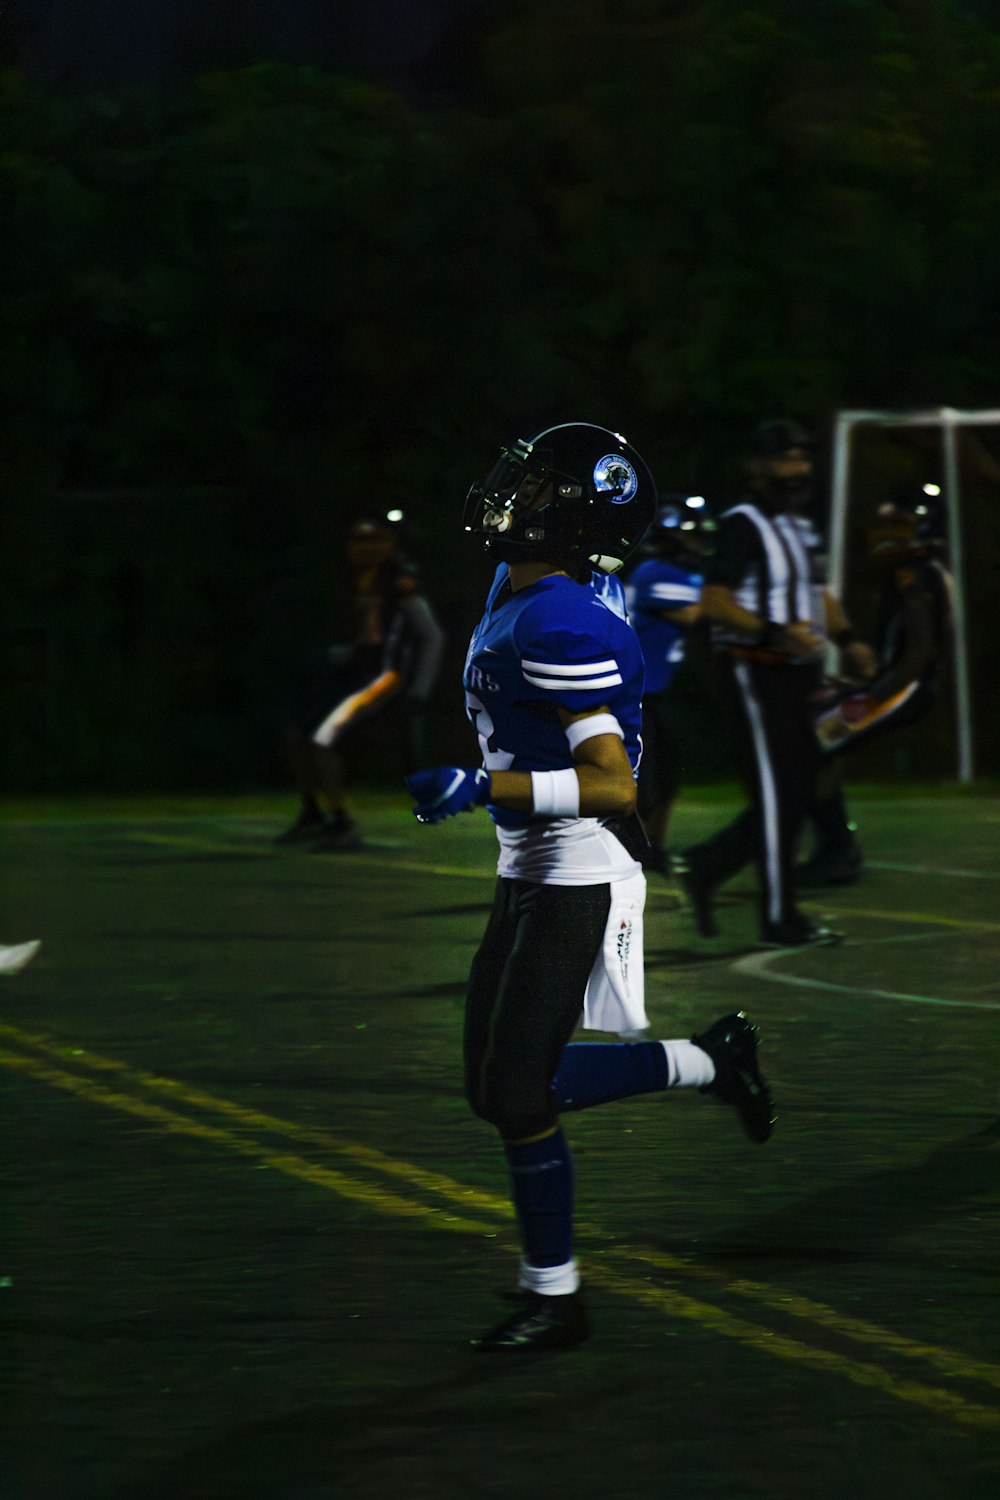 a football player running on a field at night